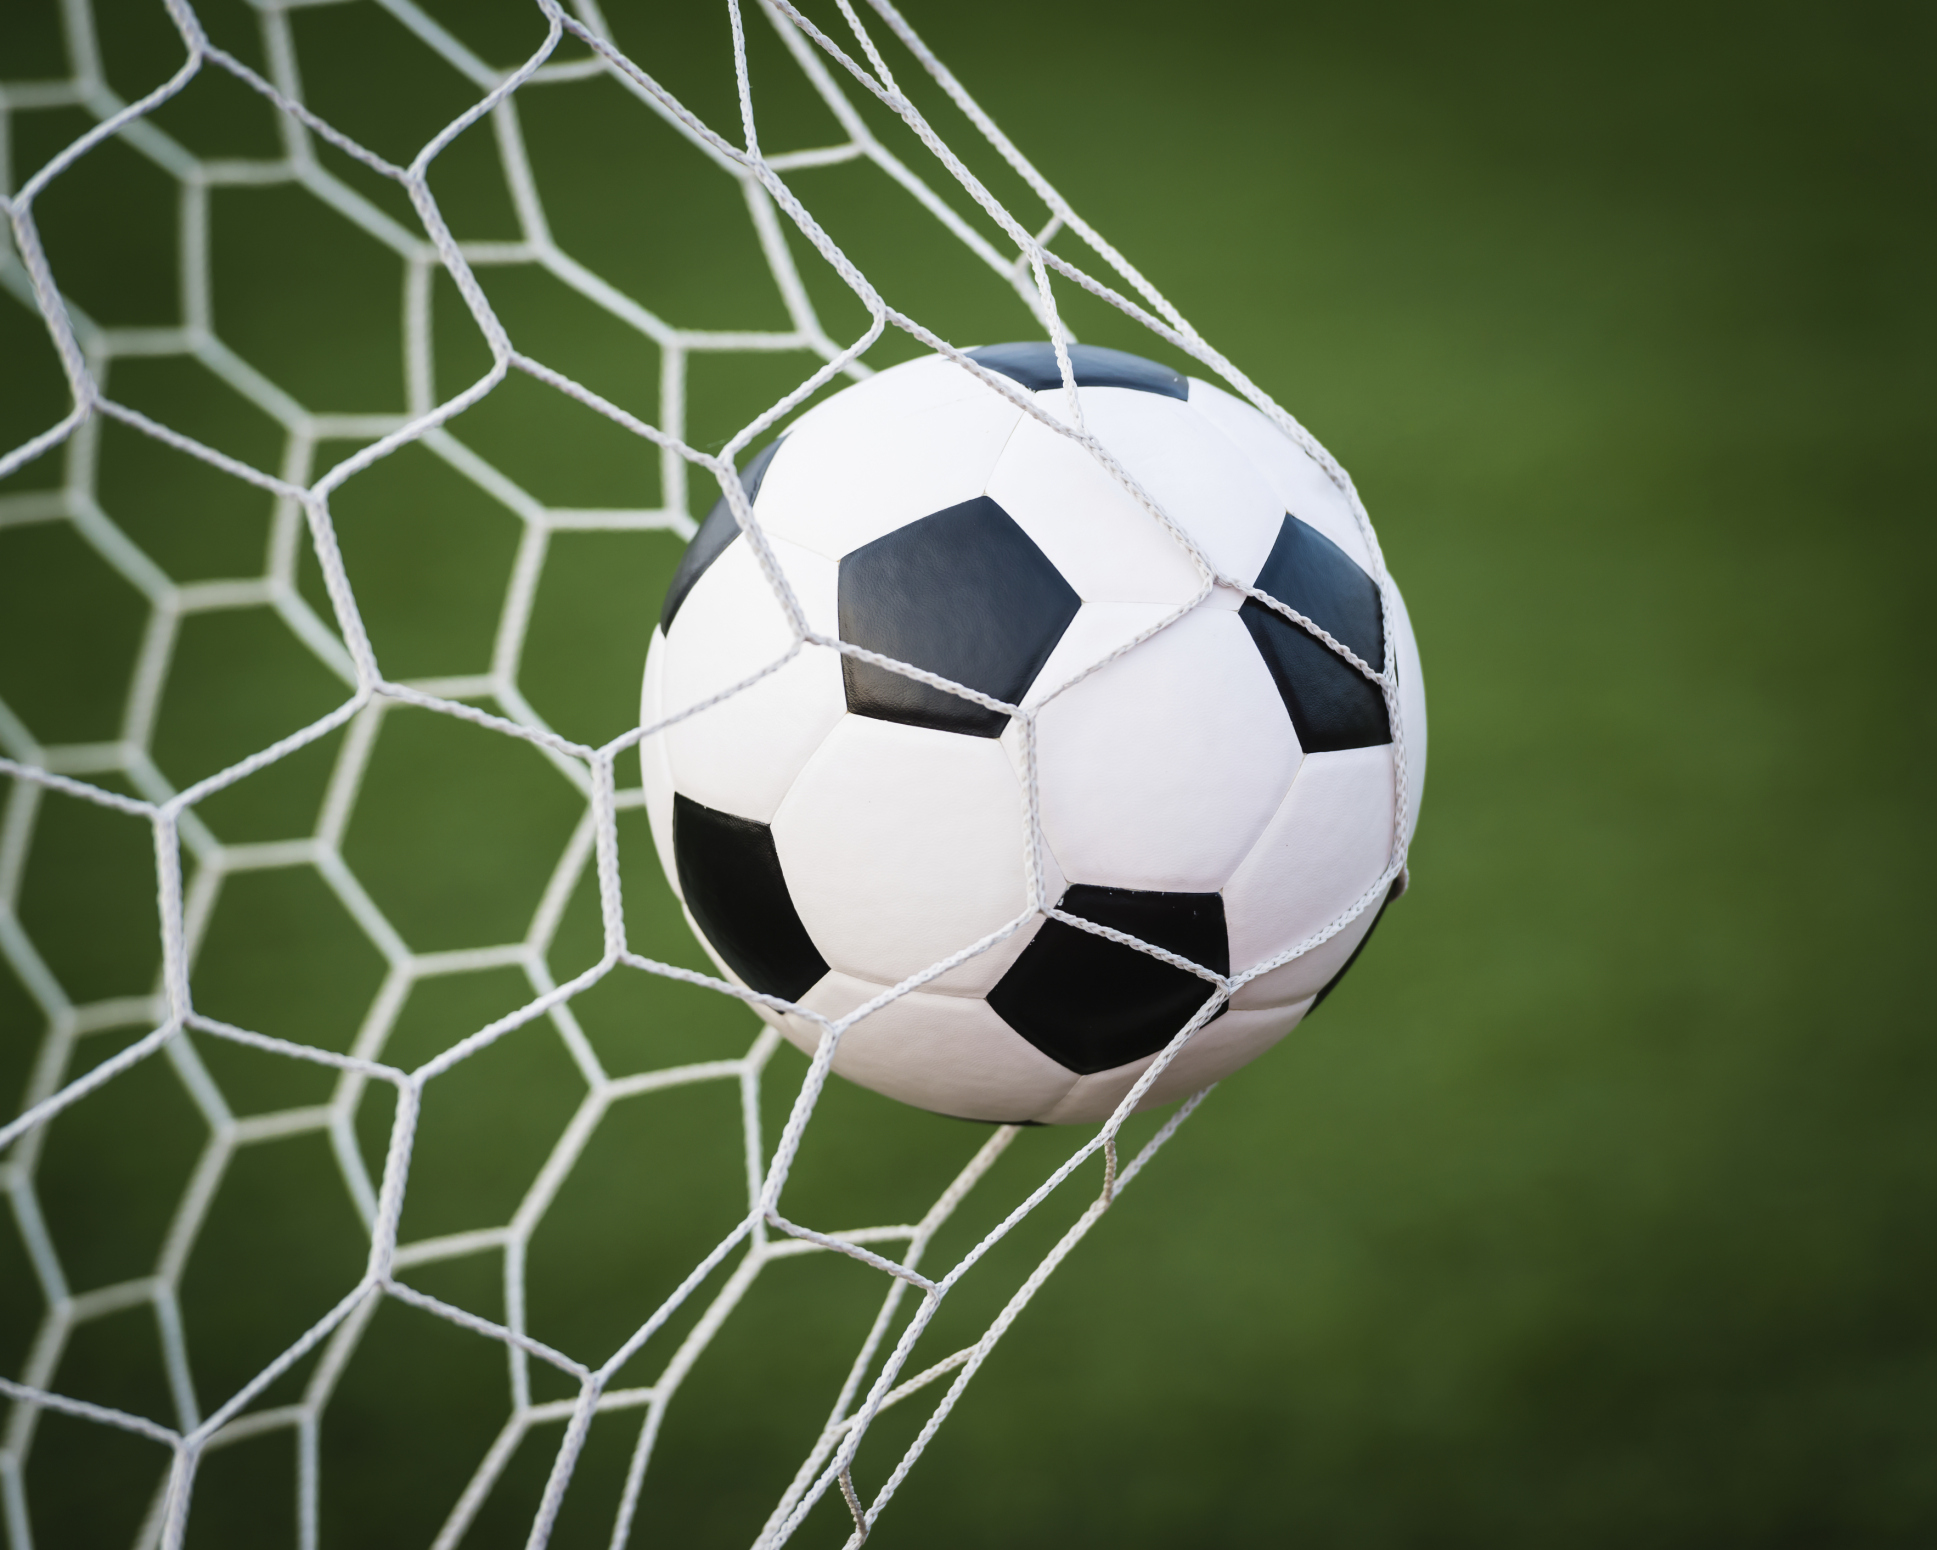 Follow these guidelines for moveable soccer goal safety | VML ...